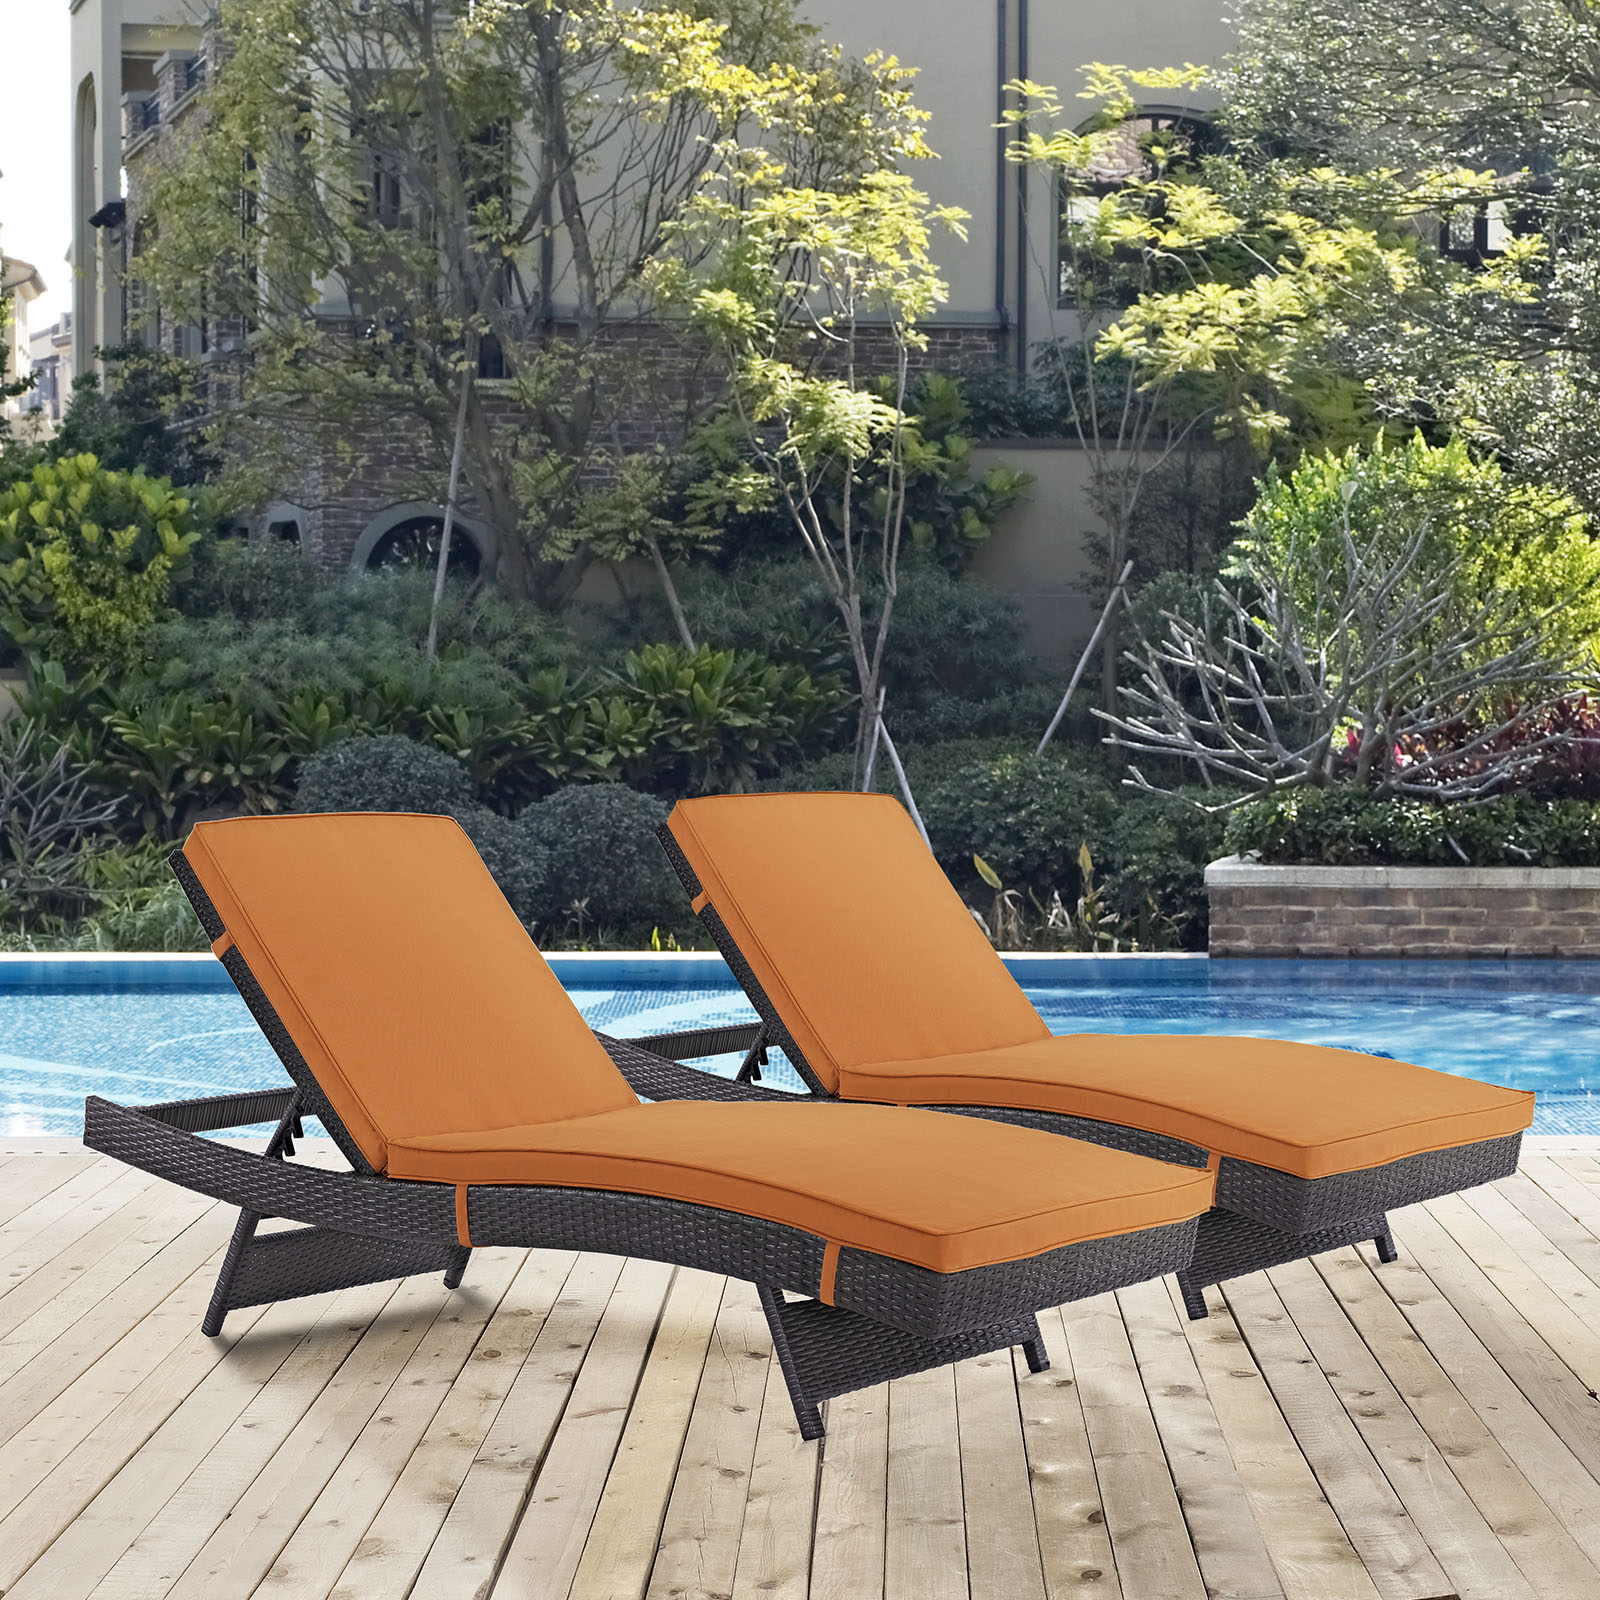 Modern Contemporary Urban Design Outdoor Patio Balcony Chaise Lounge Chair ( Set of 2), Orange, Rattan - image 2 of 4